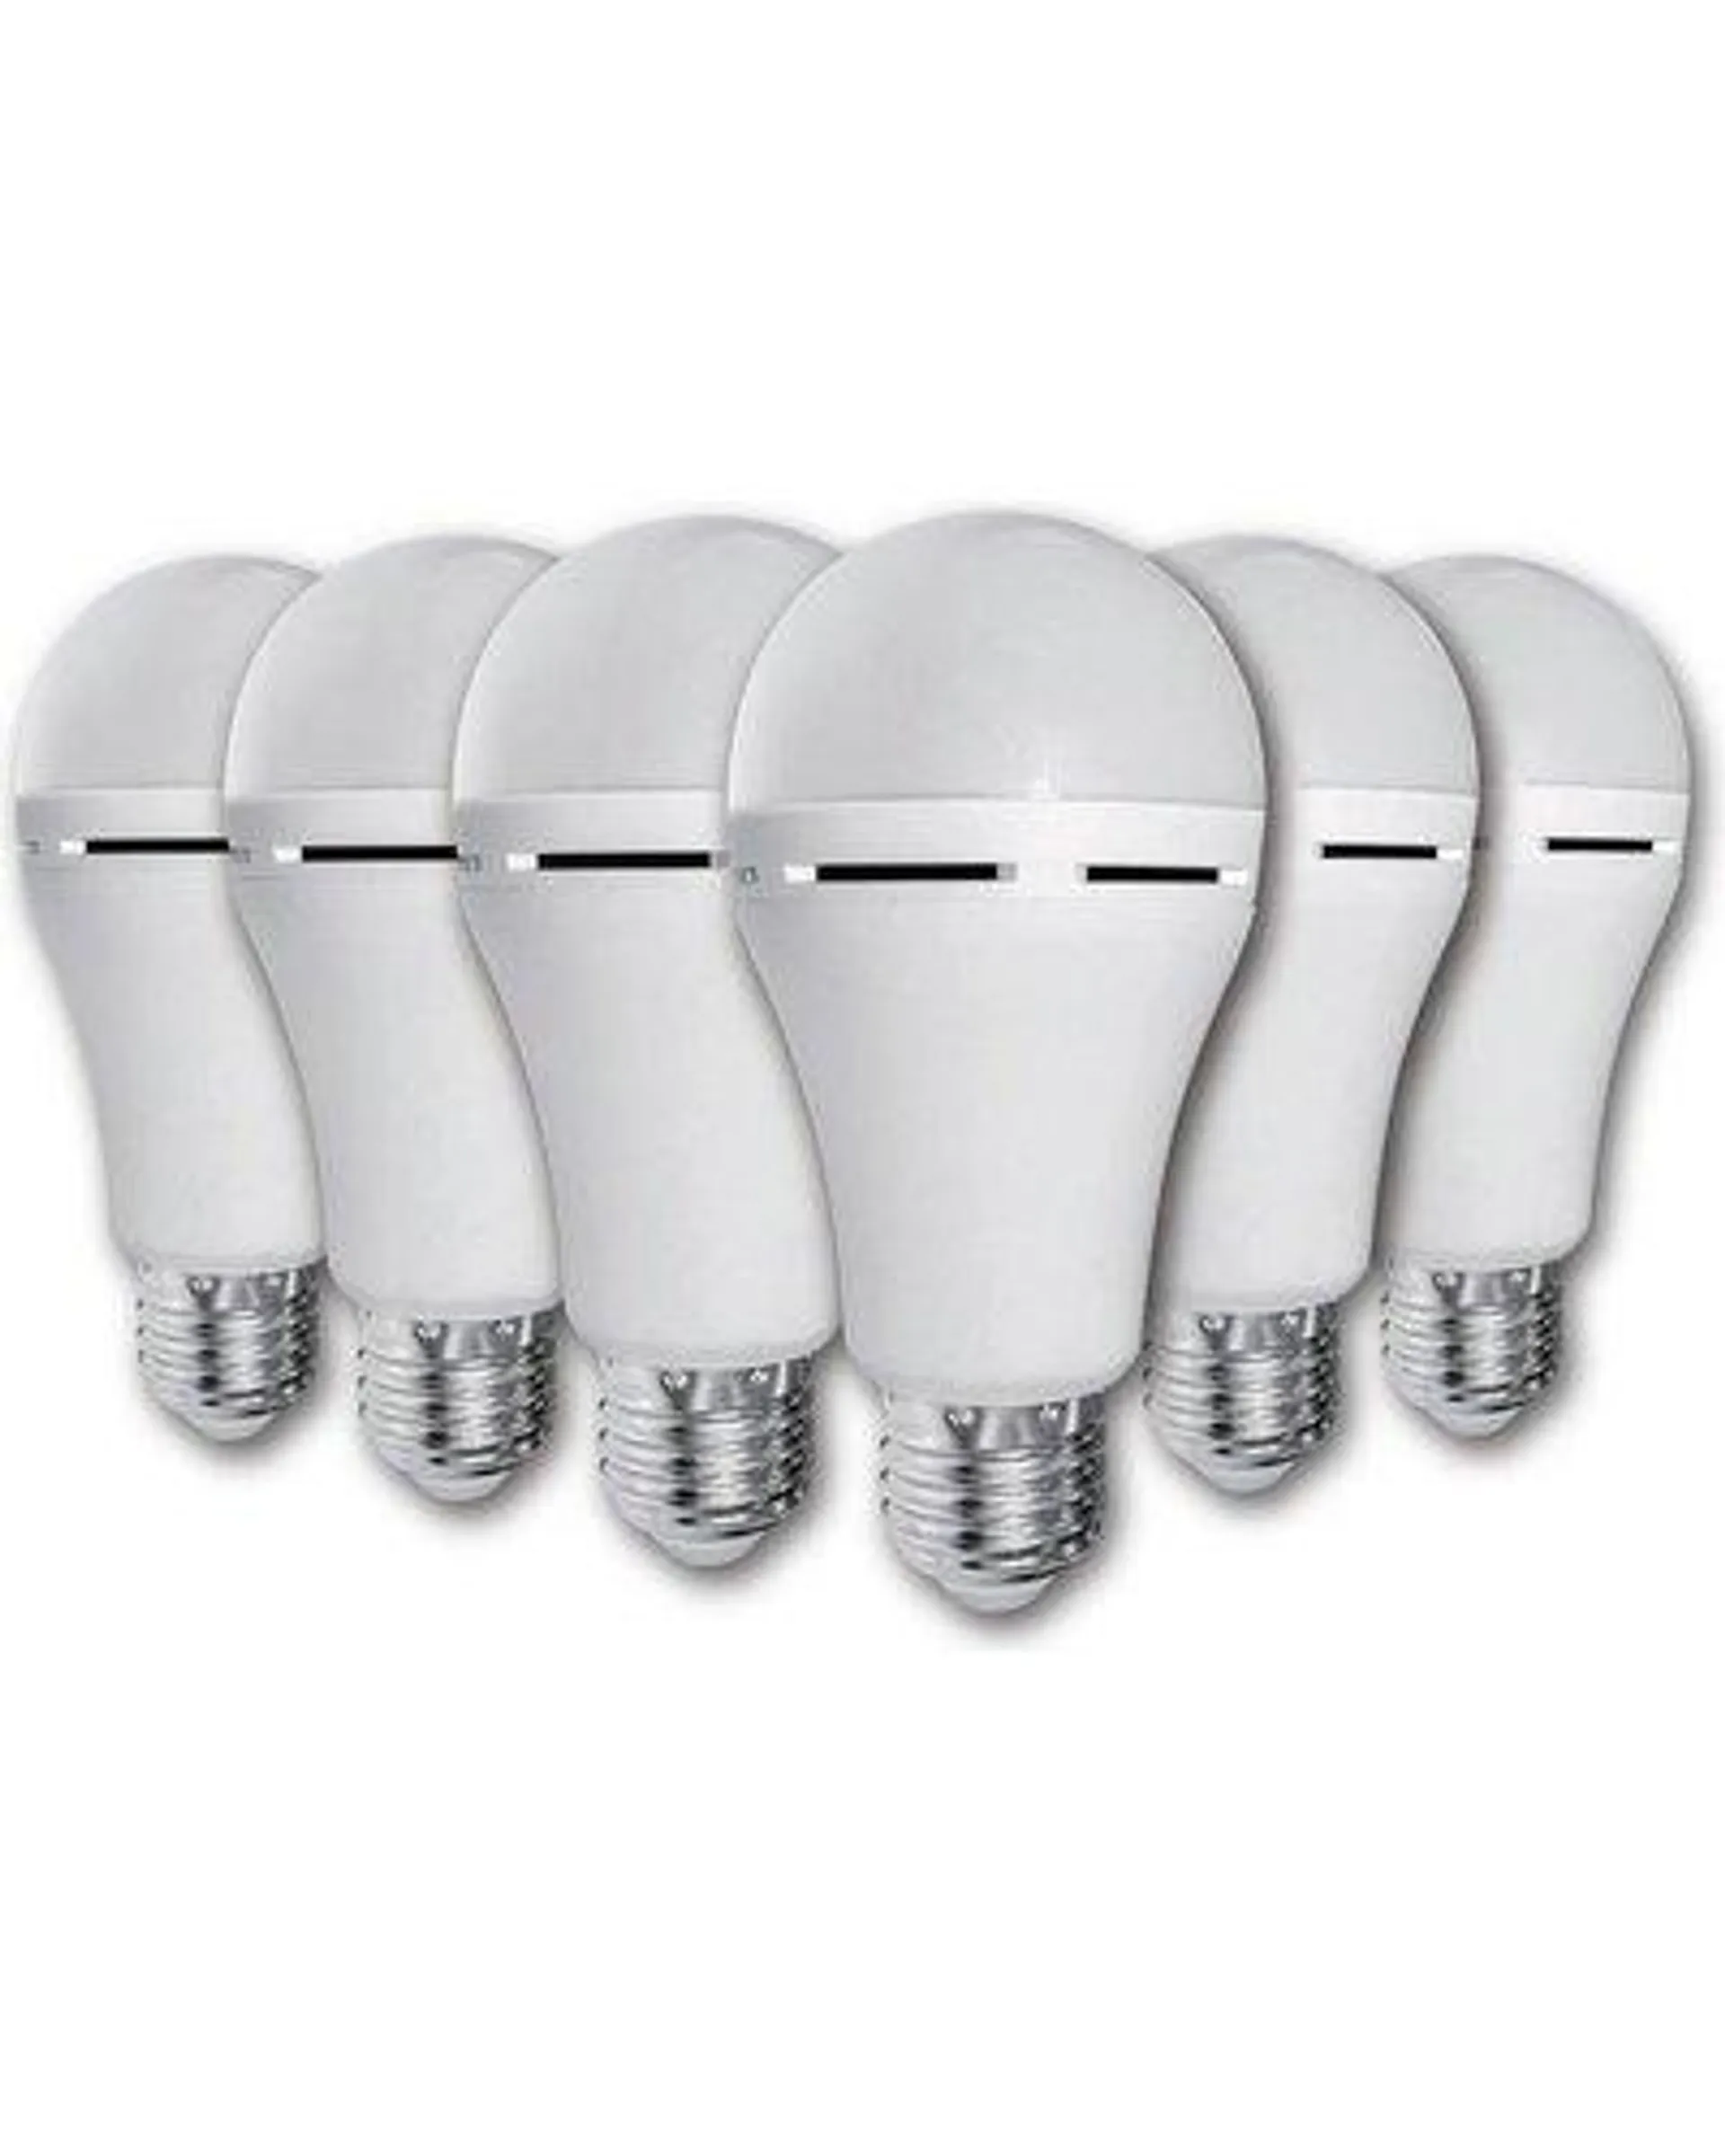 Elecstor E27 7W Rechargeable LED Bulb (Cool White)(Pack of 6)